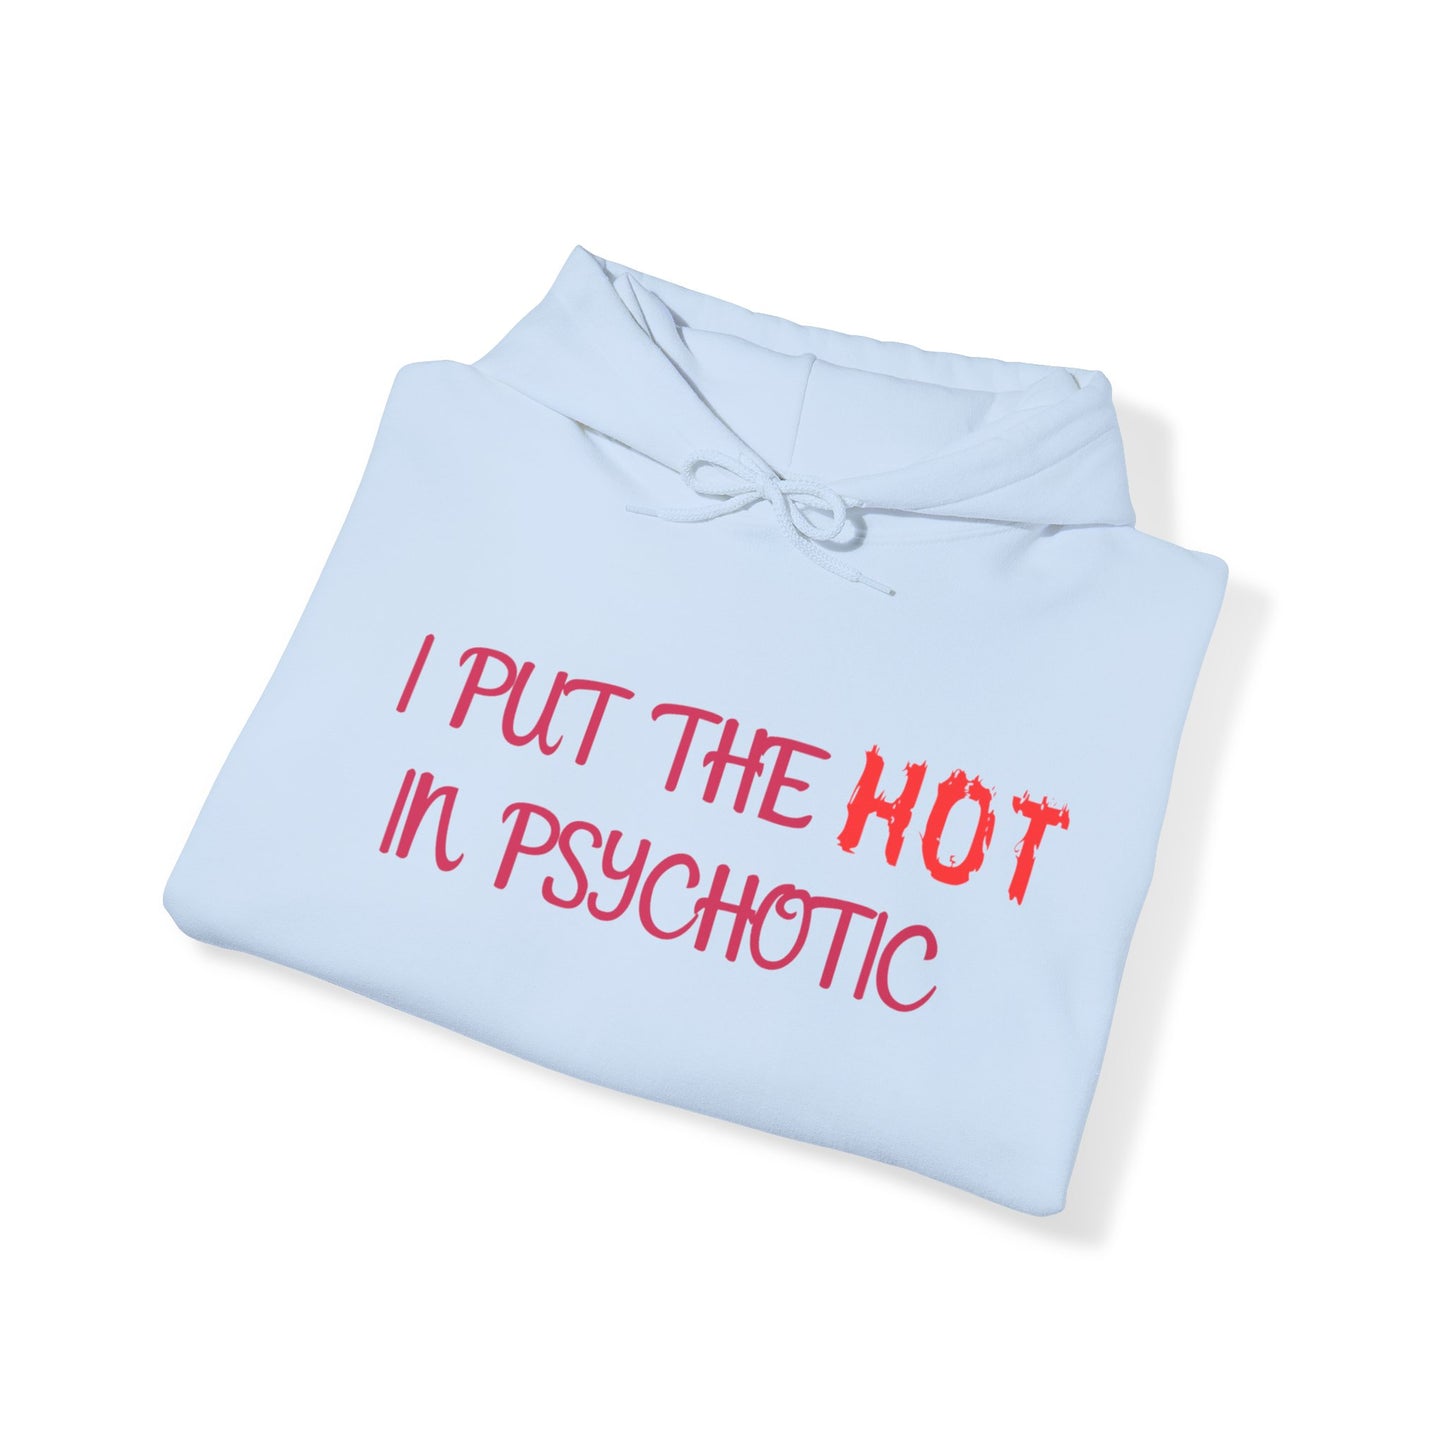 "I put the HOT in Psychotic" - Hoodie